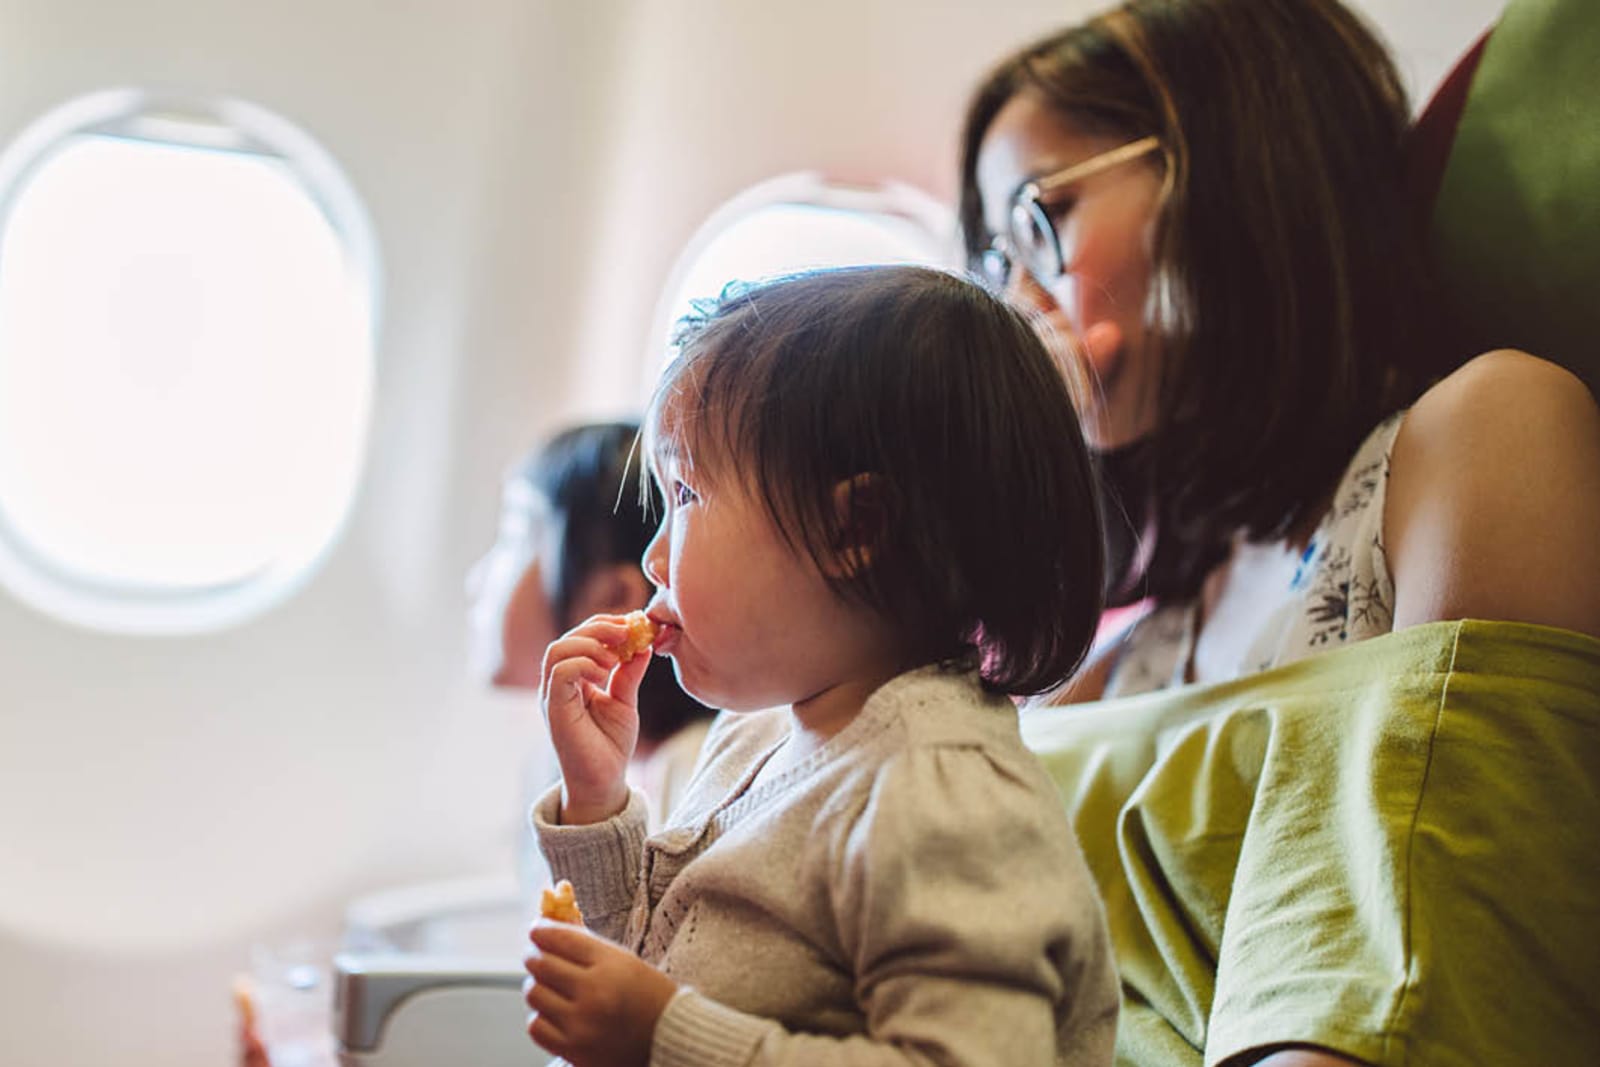 A mother and her young children on a plane; one of the children sits in her lap